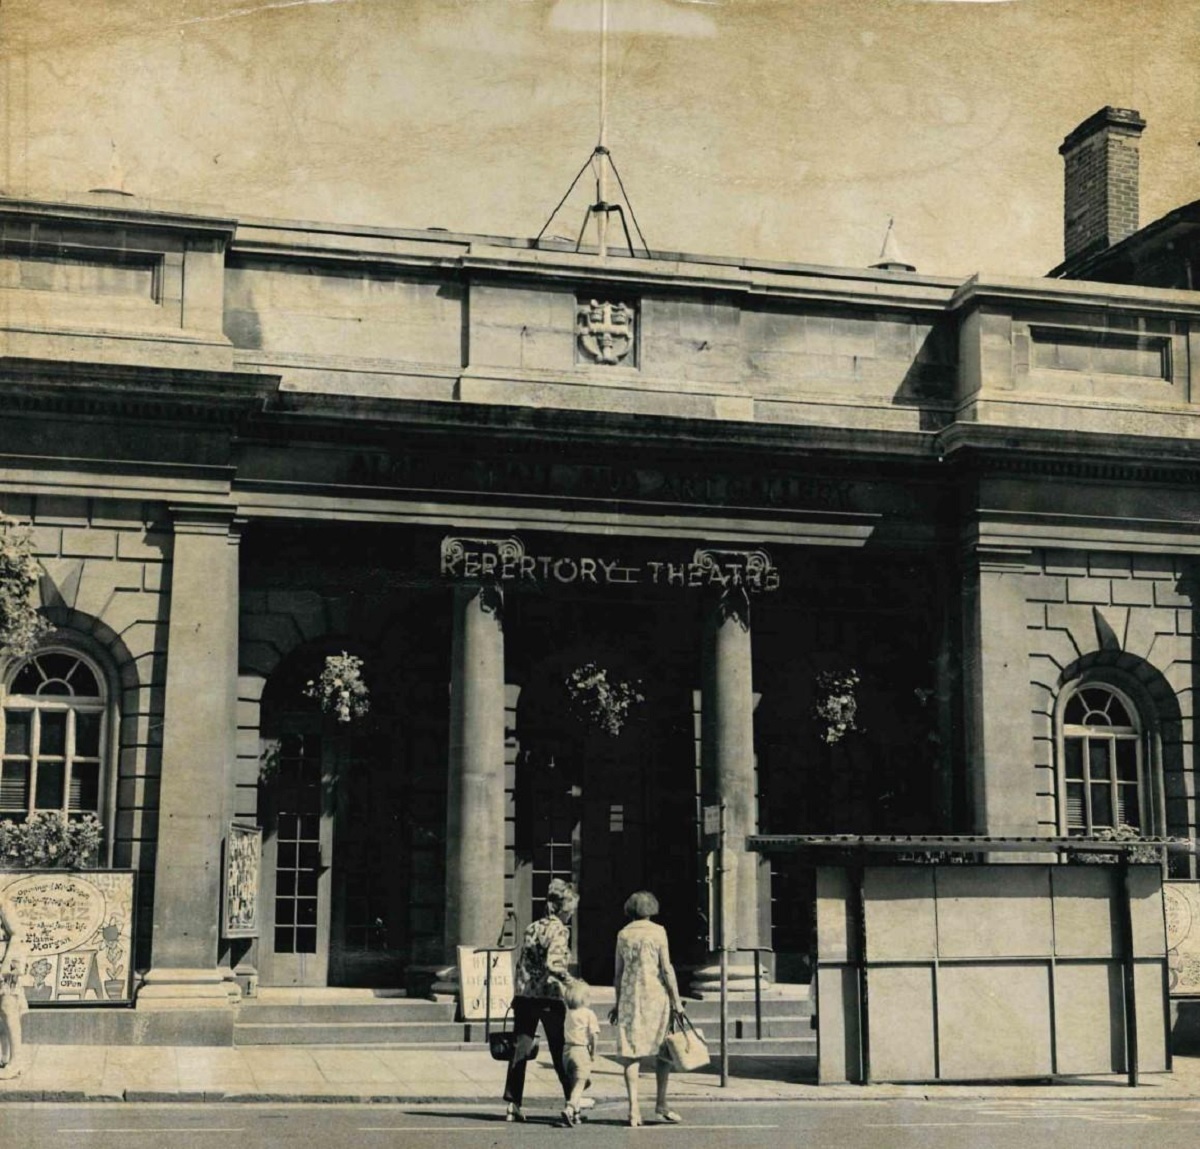 History - the theatre was housed at the Albert Hall which was once the Corne Exchange and dates back to the 1800s